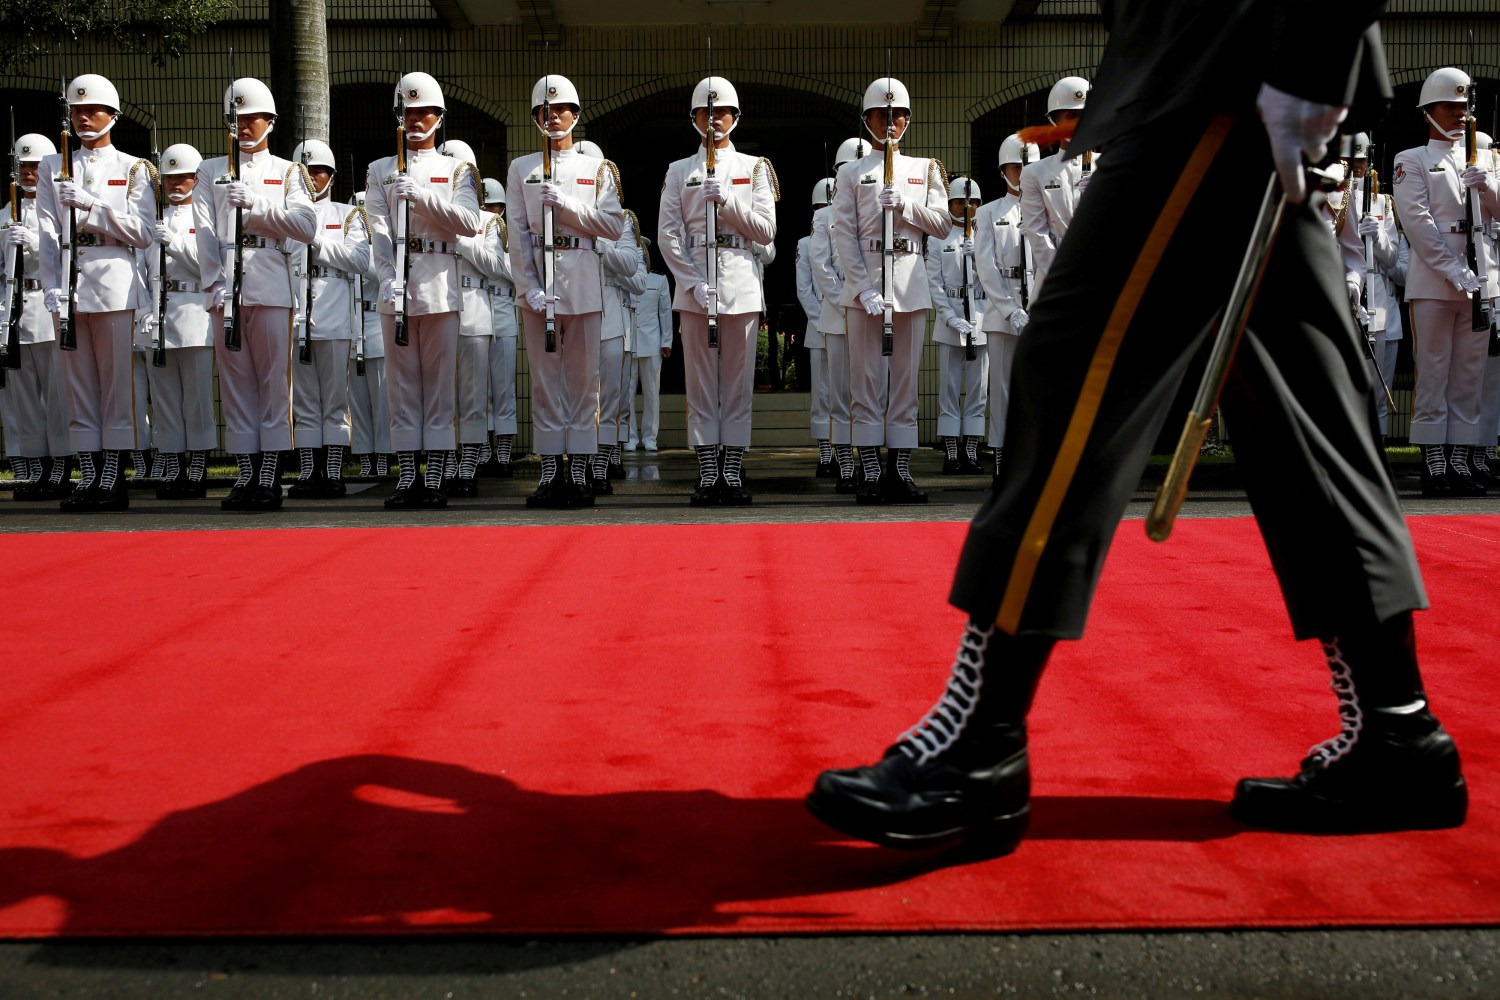 Taiwanese honour guards stand during a ceremony to mark the 92nd anniversary of the Whampoa Military Academy, in Kaohsiung, southern Taiwan June 16, 2016. REUTERS/Tyrone Siu TPX IMAGES OF THE DAY - RTX2GHZ3